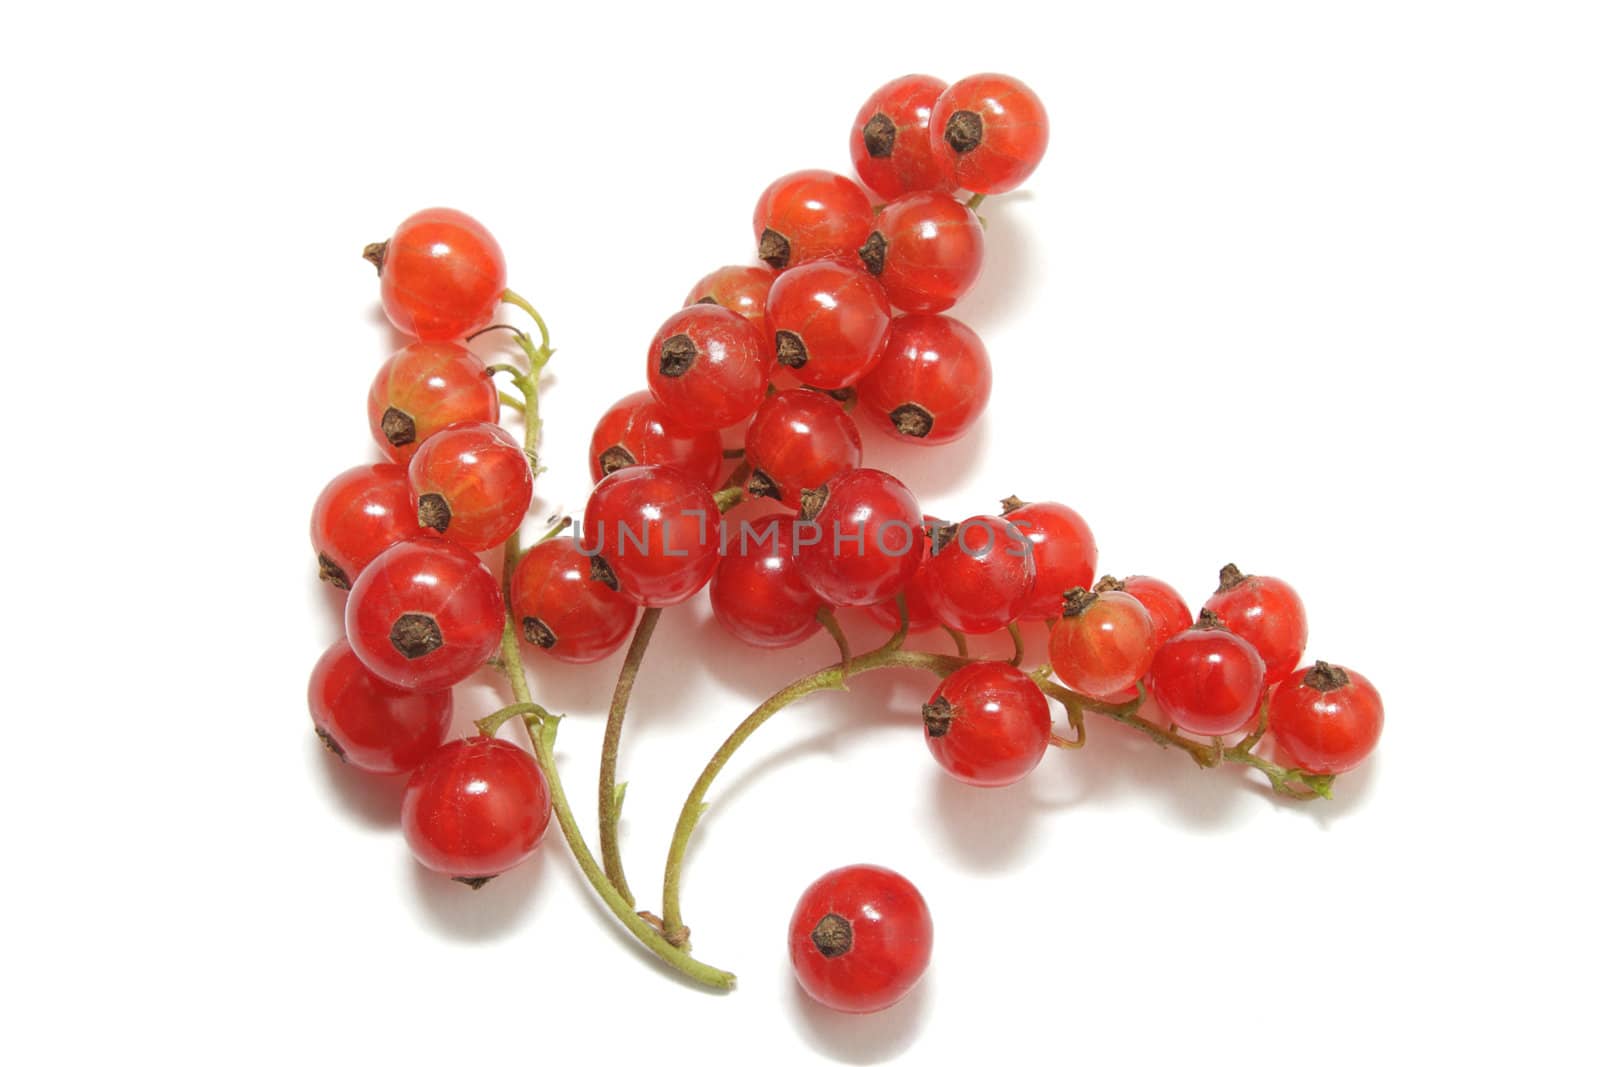 Three clusters of red currant and a single berry isolated on white background